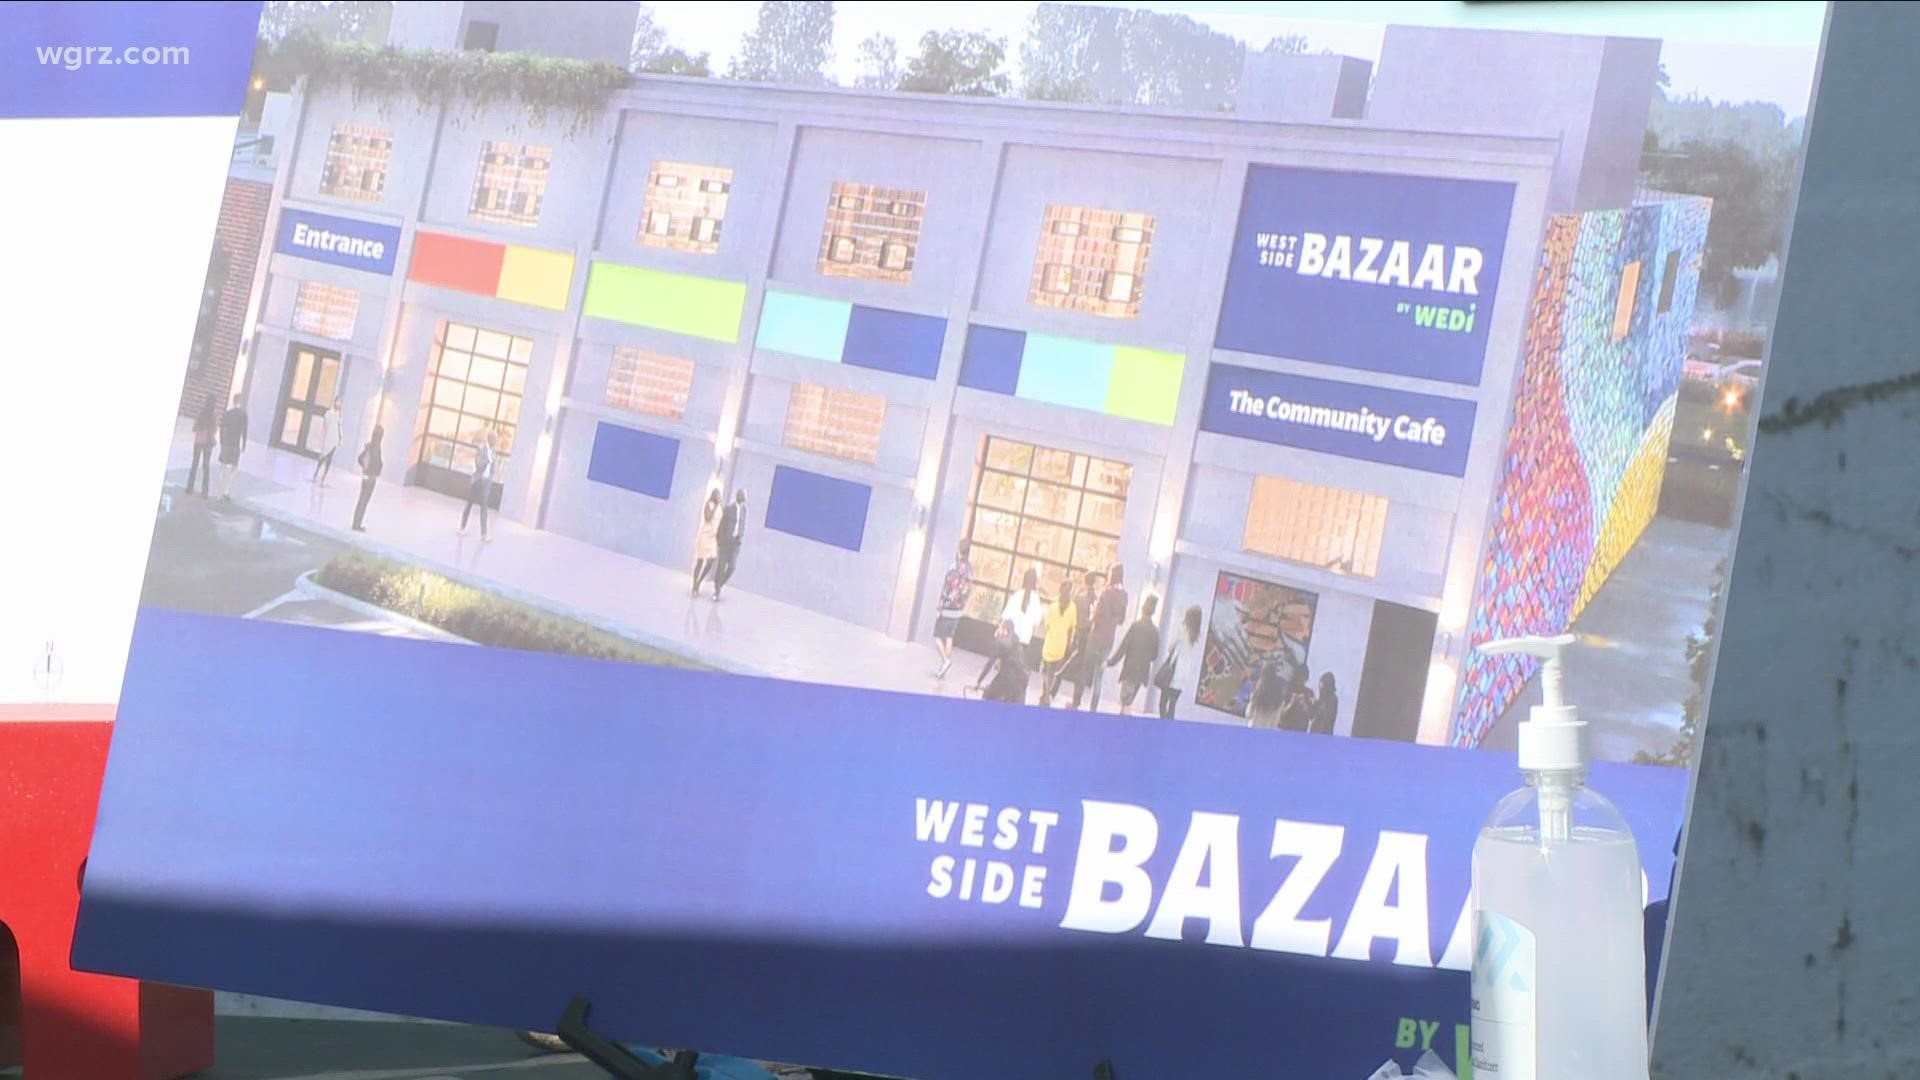 New location for the West Side Bazaar